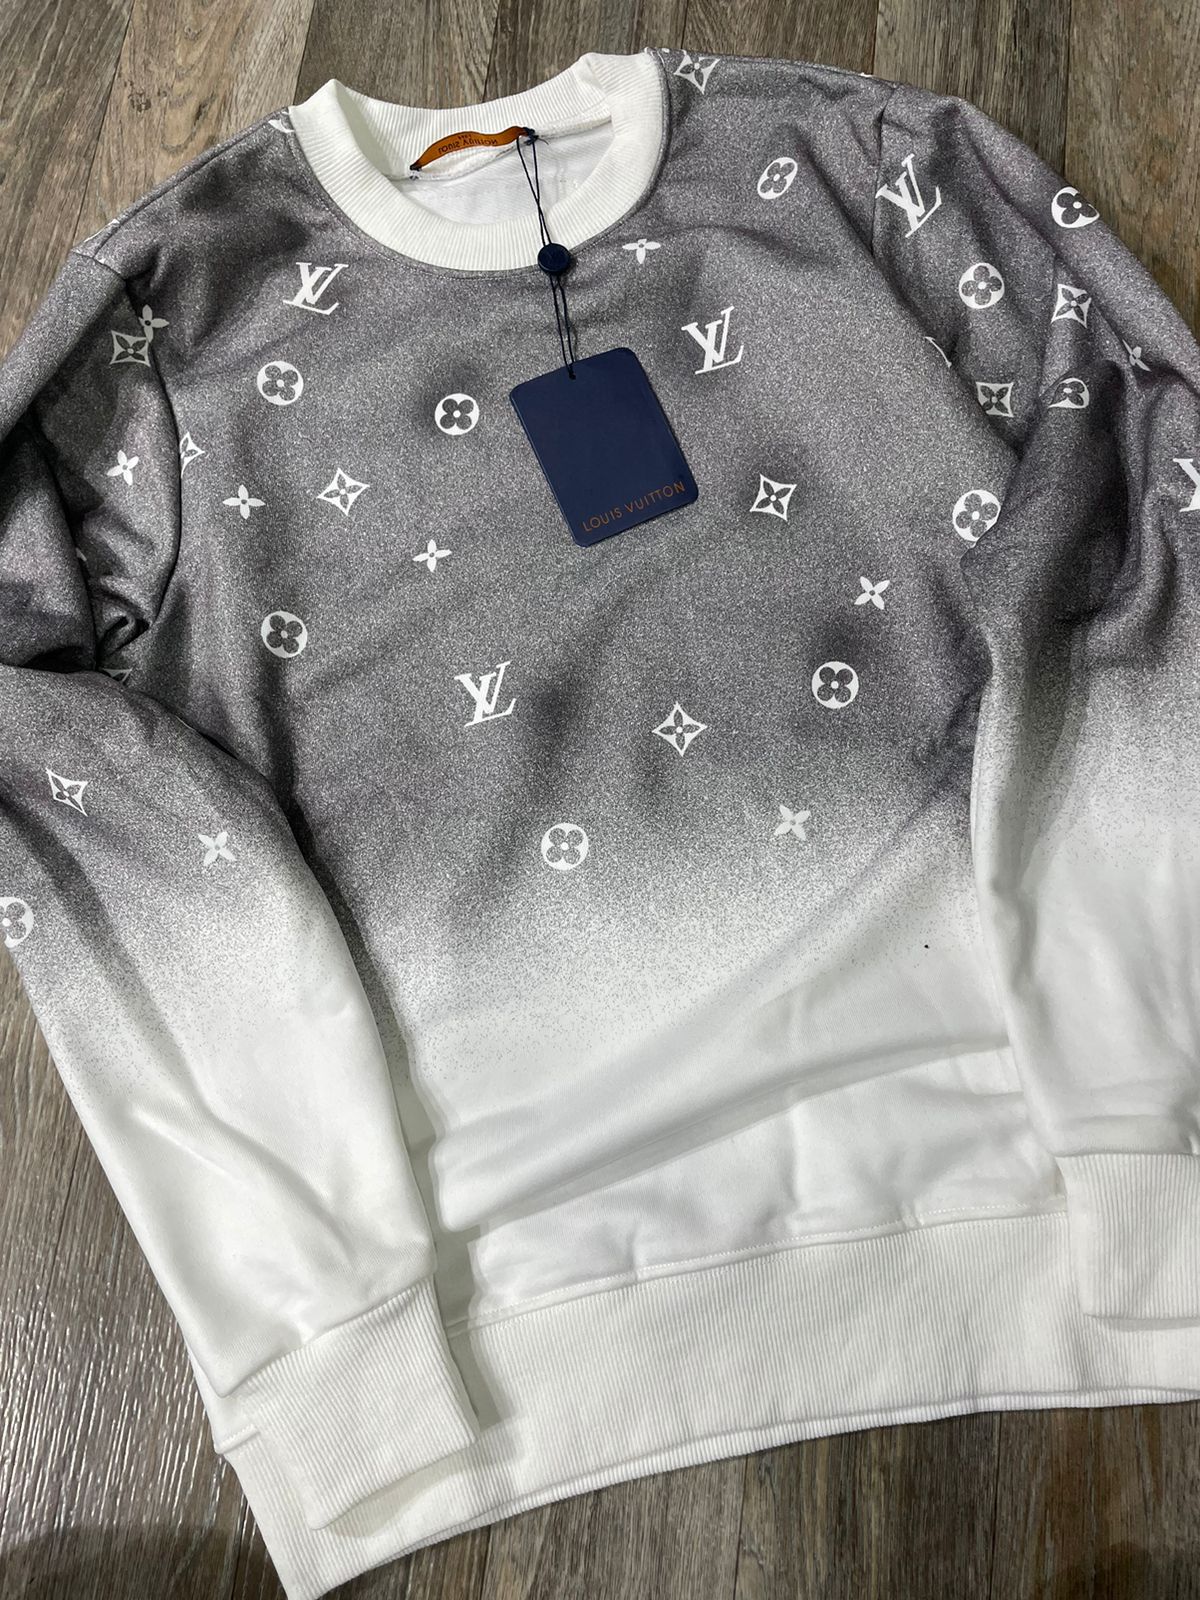 Louis Vuitton Hoodie Luxury Brand New Clothing Clothes Outfits